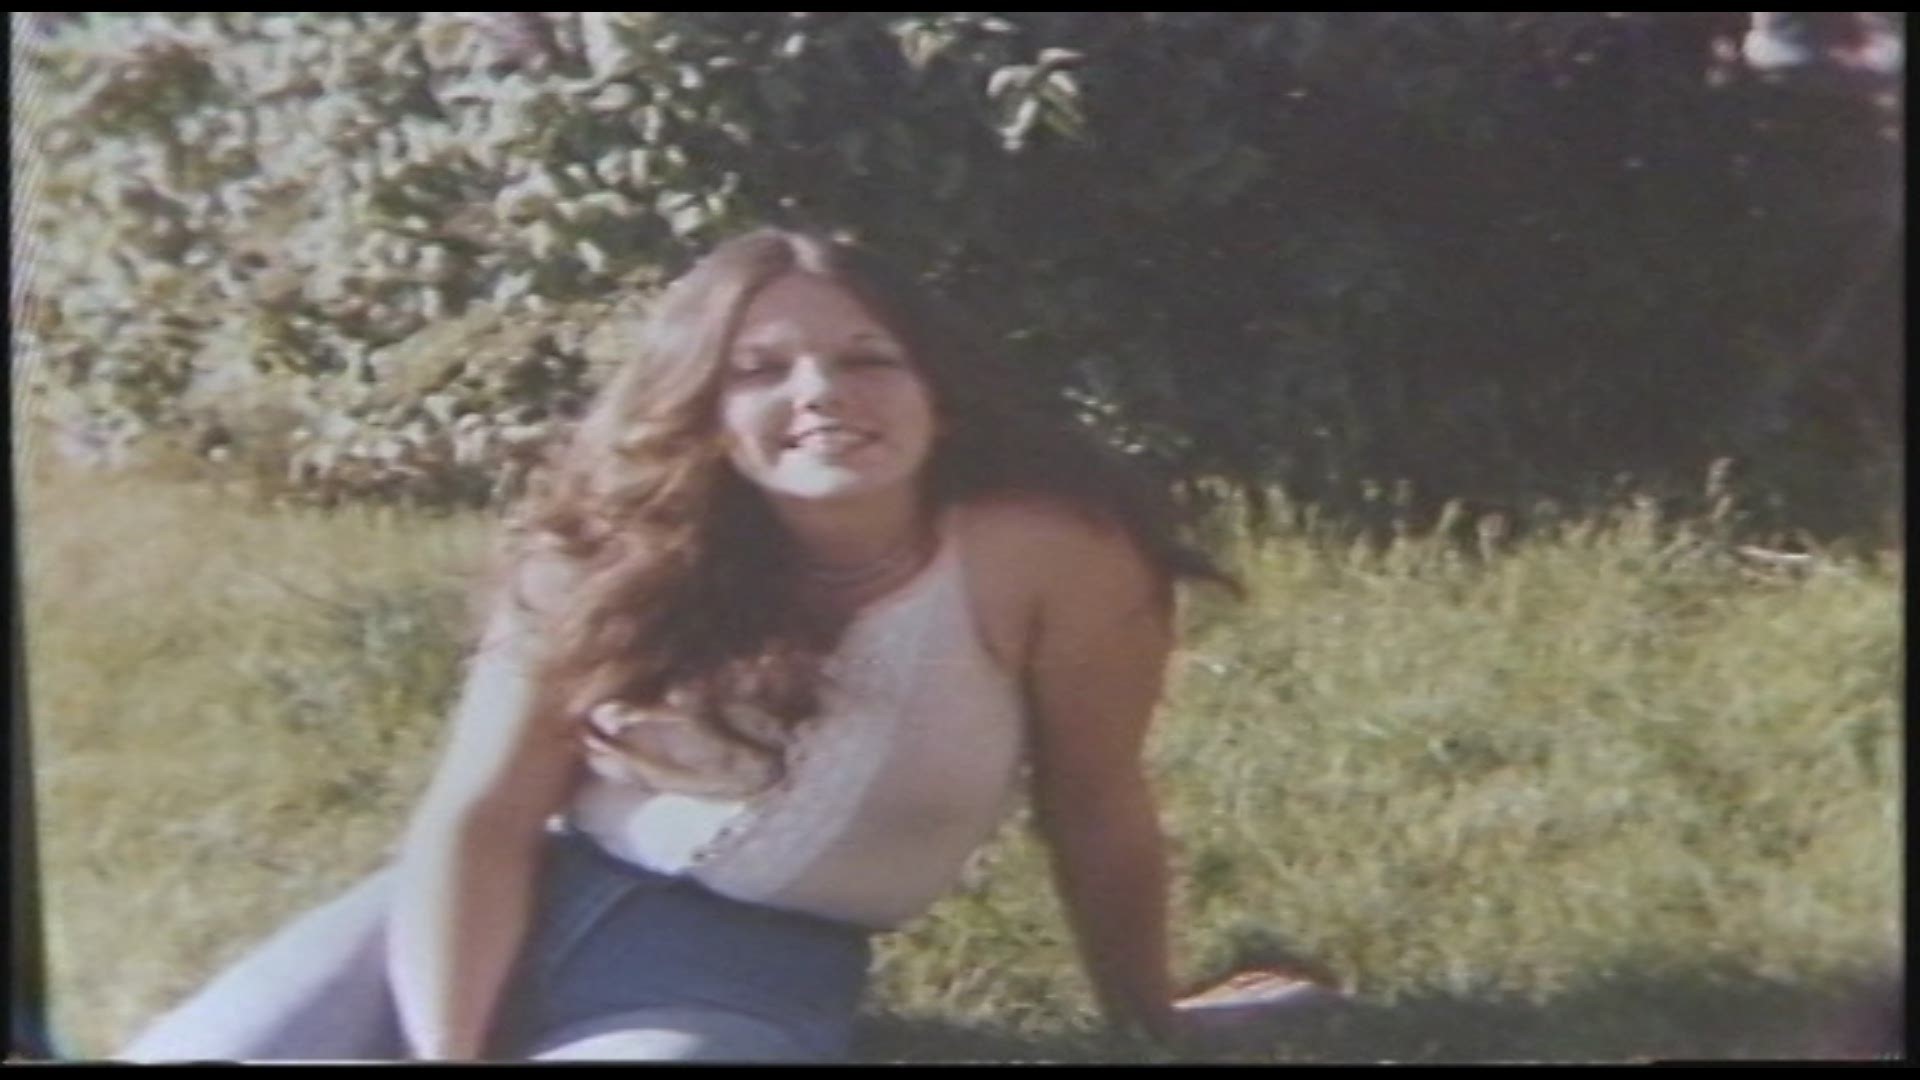 Jeannie Moore disappeared on Aug. 25, 1981. Her body was found five days later. Jefferson County sheriff’s investigators have since identified a now-deceased suspect through cutting-edge DNA work.